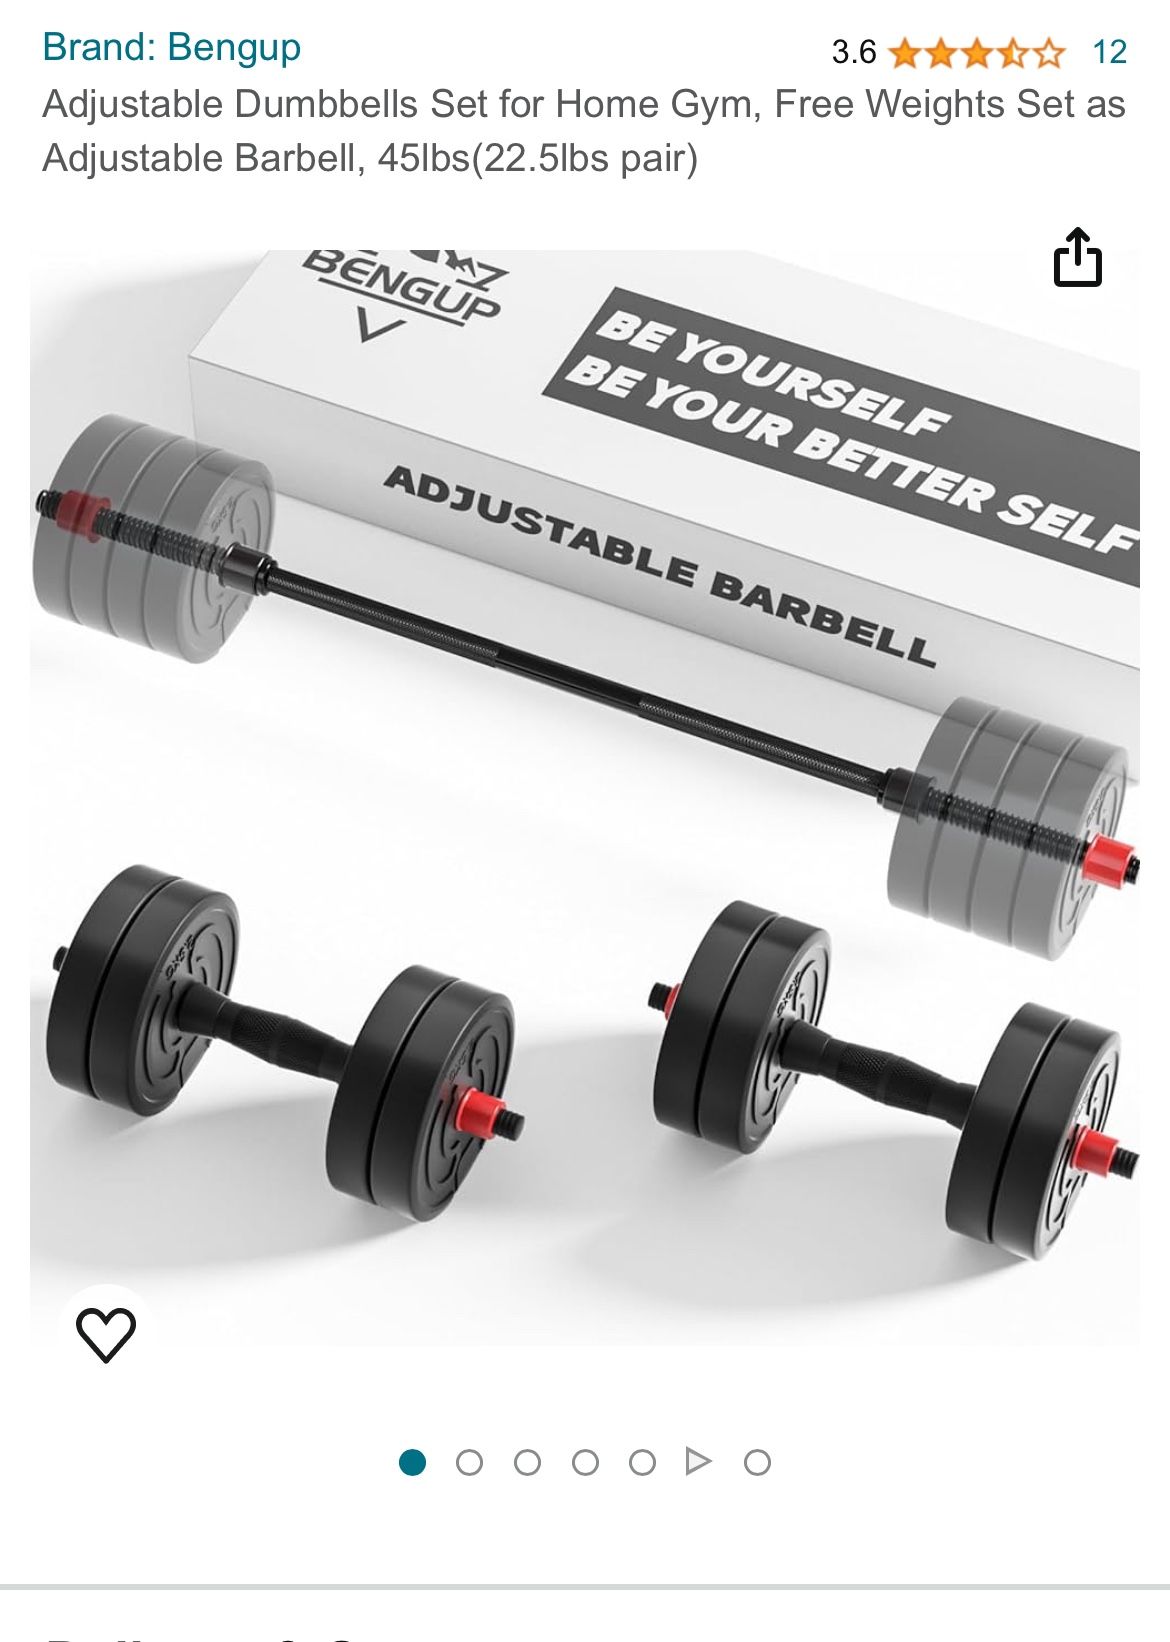 New Weights For Sale - FREE